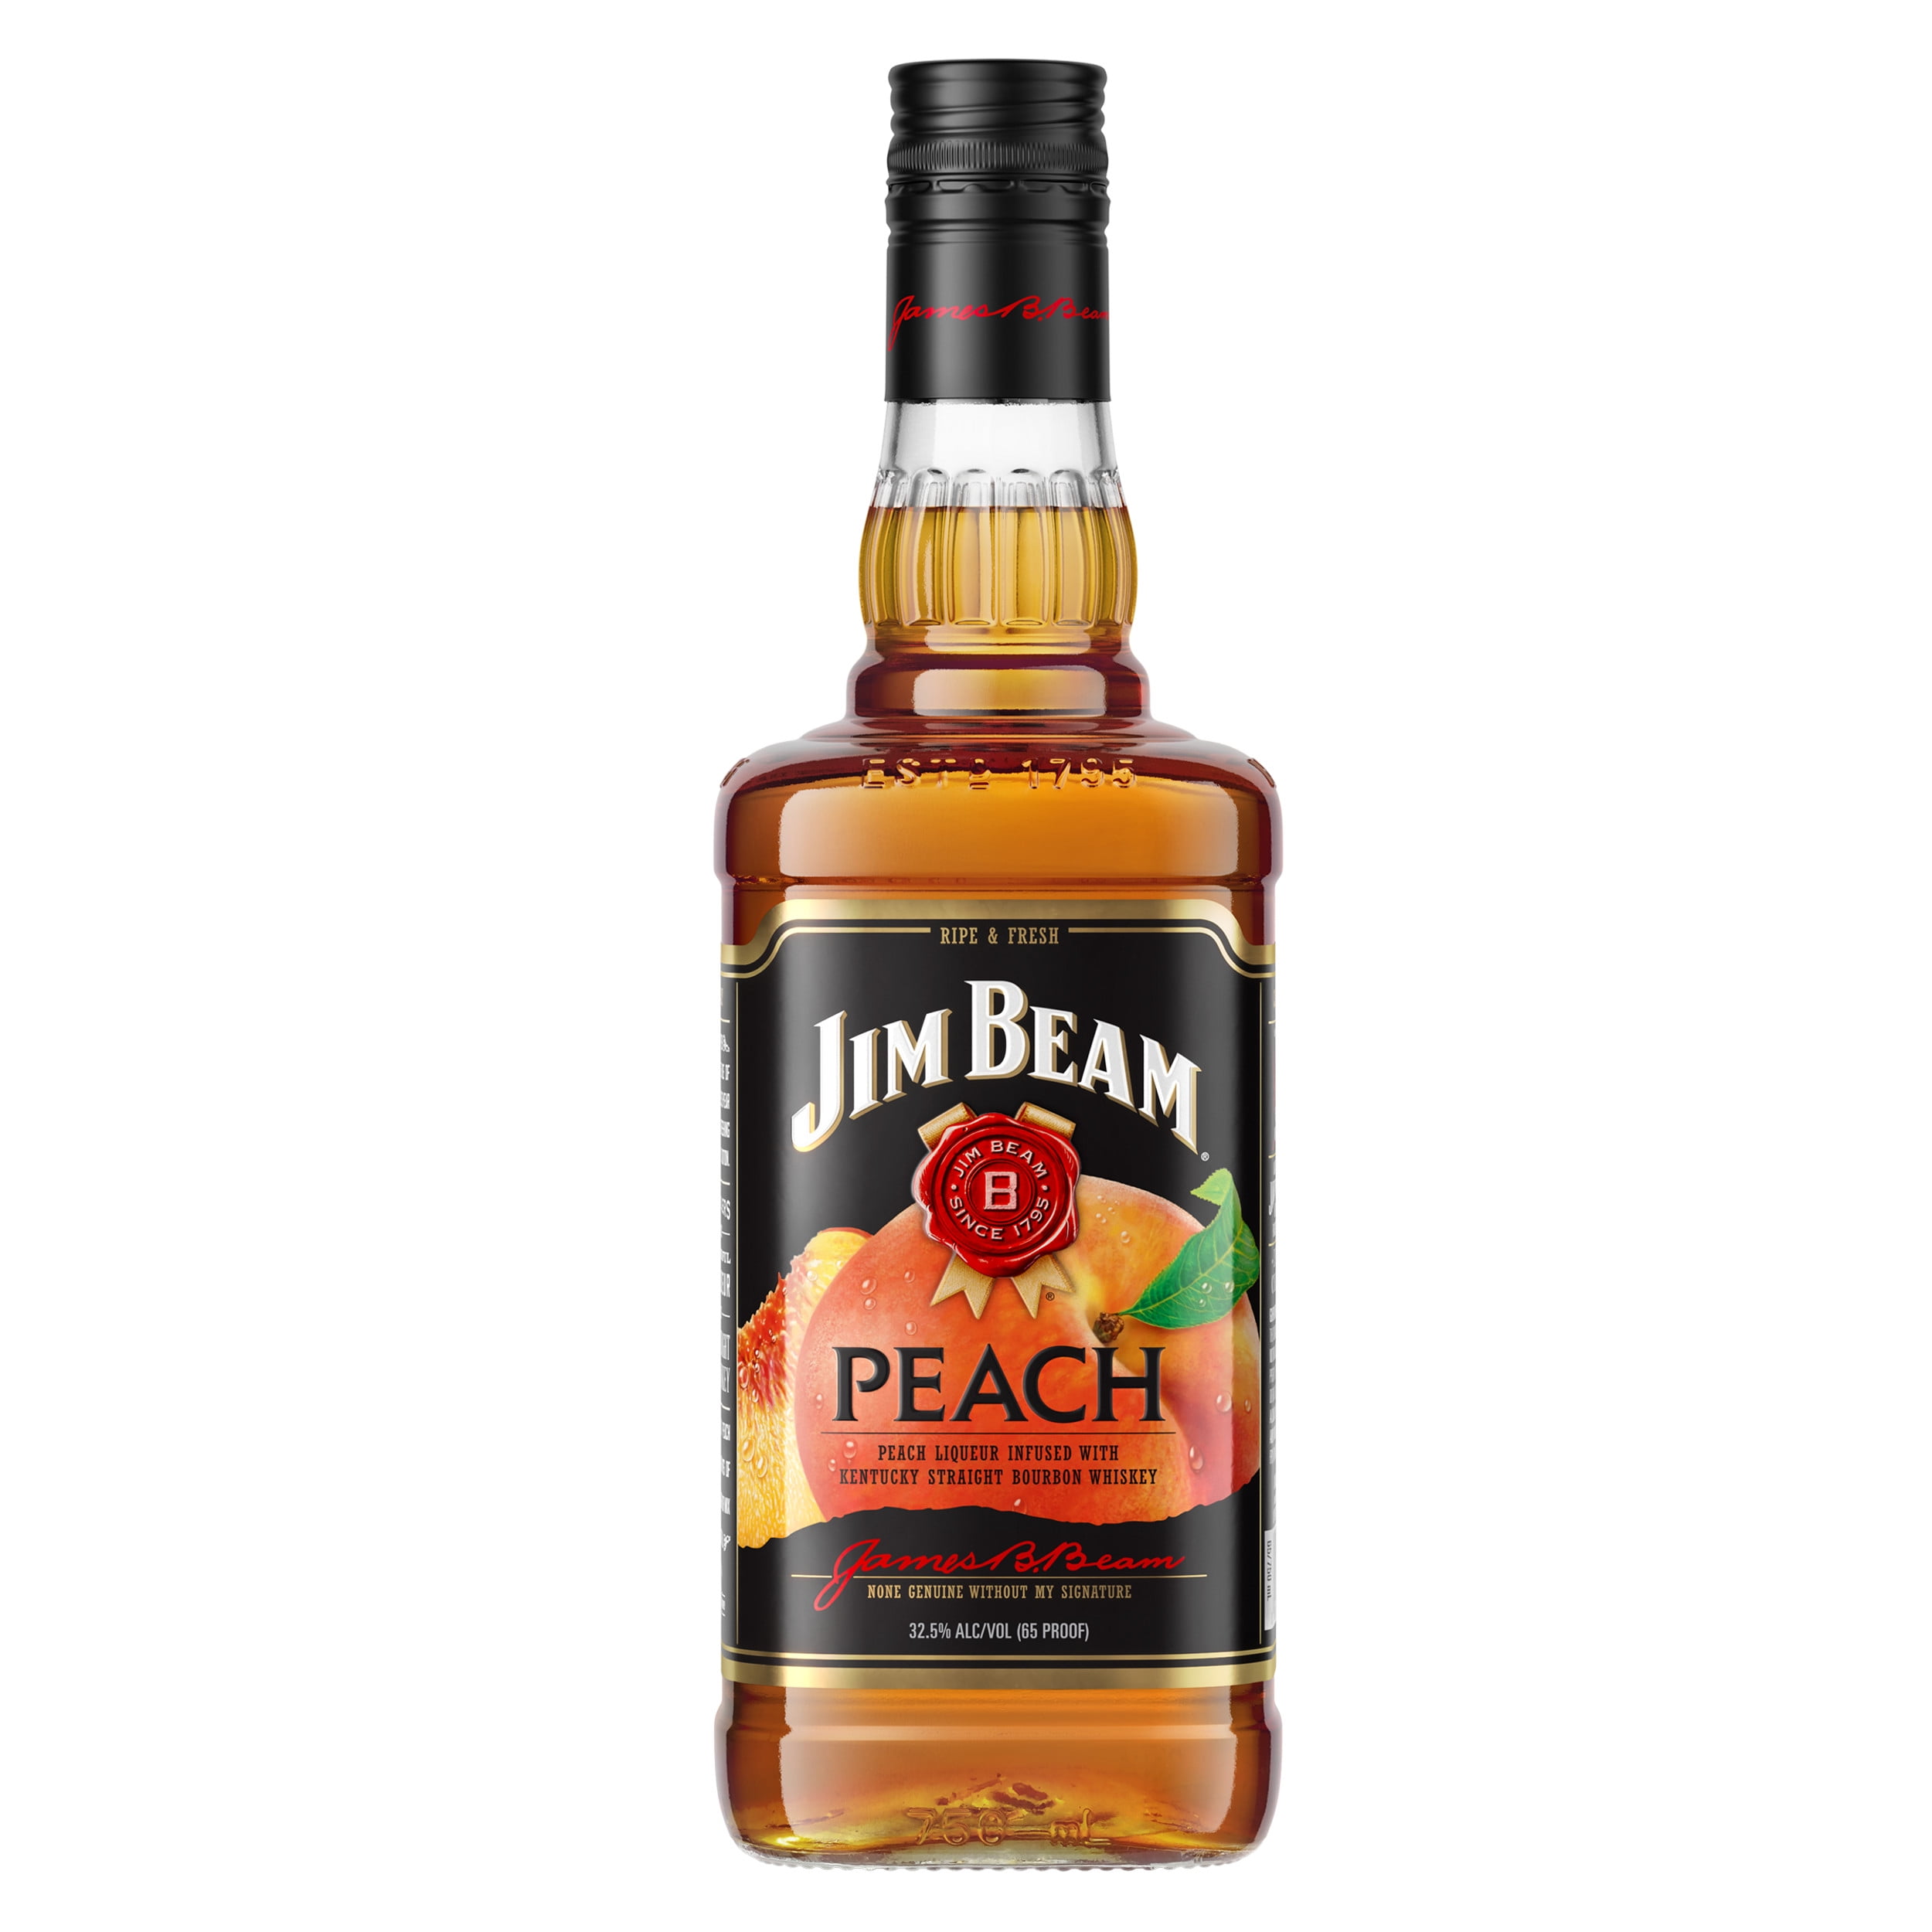 Jim Beam Peach Infused Straight Bourbon Flavored Whiskey, 750 ml Bottle,  ABV 32.5%